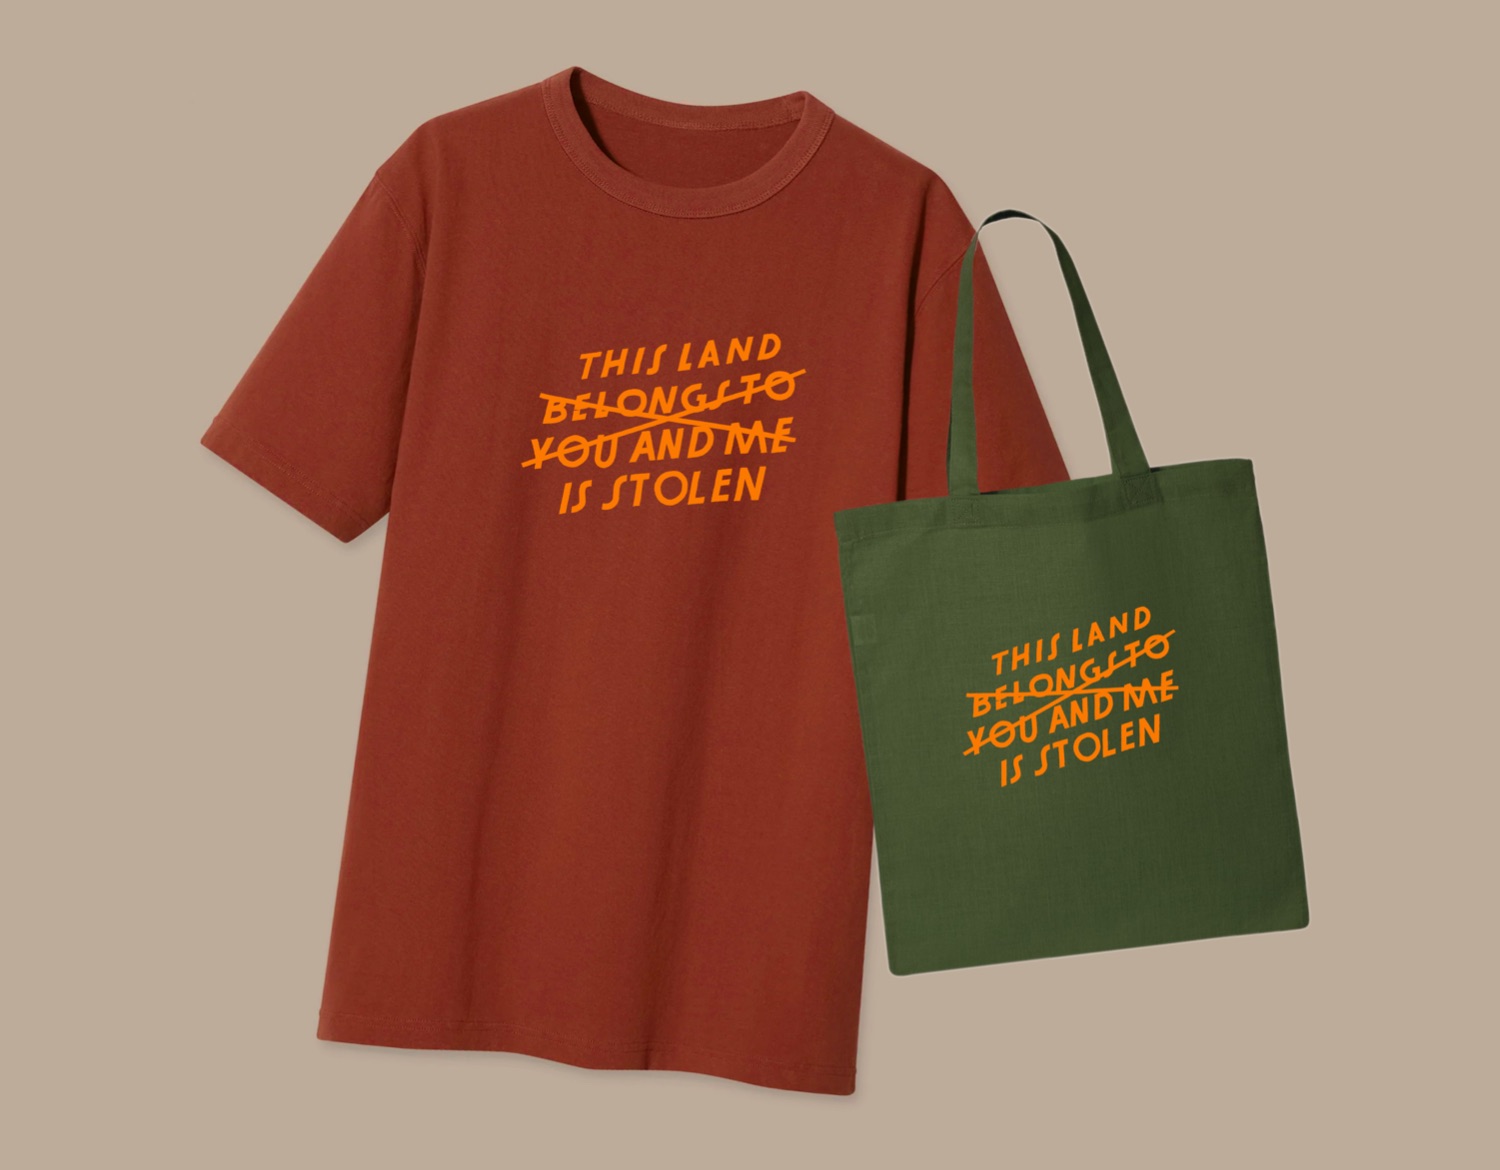 A shirt and tote bag with the words "This land is stolen"